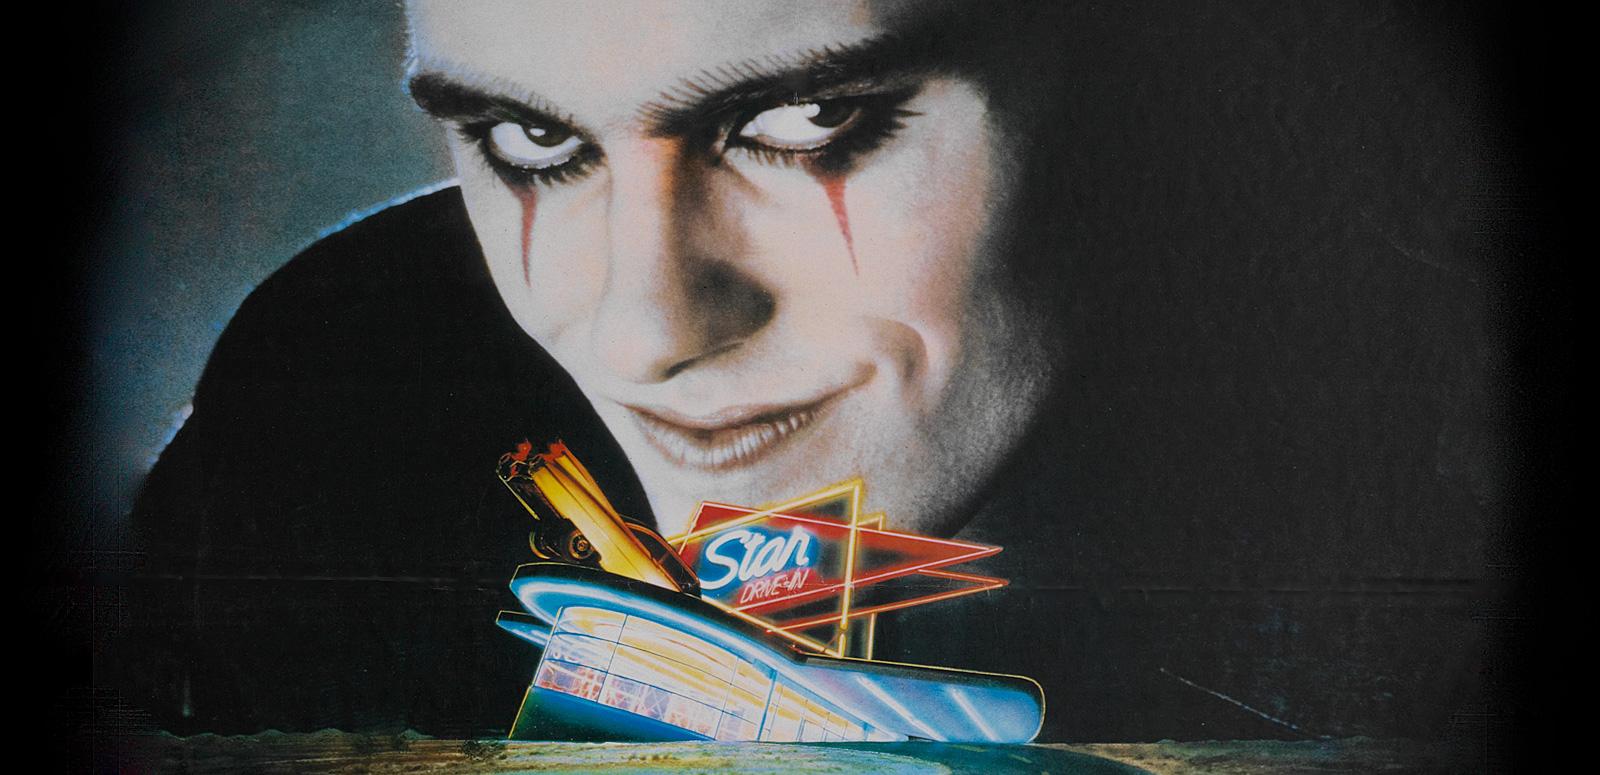 A close-up of a menacing looking man with dark eye make-up and an evil grin. His head looms over a smaller image of a neon-lit drive-in cinema and empty road.